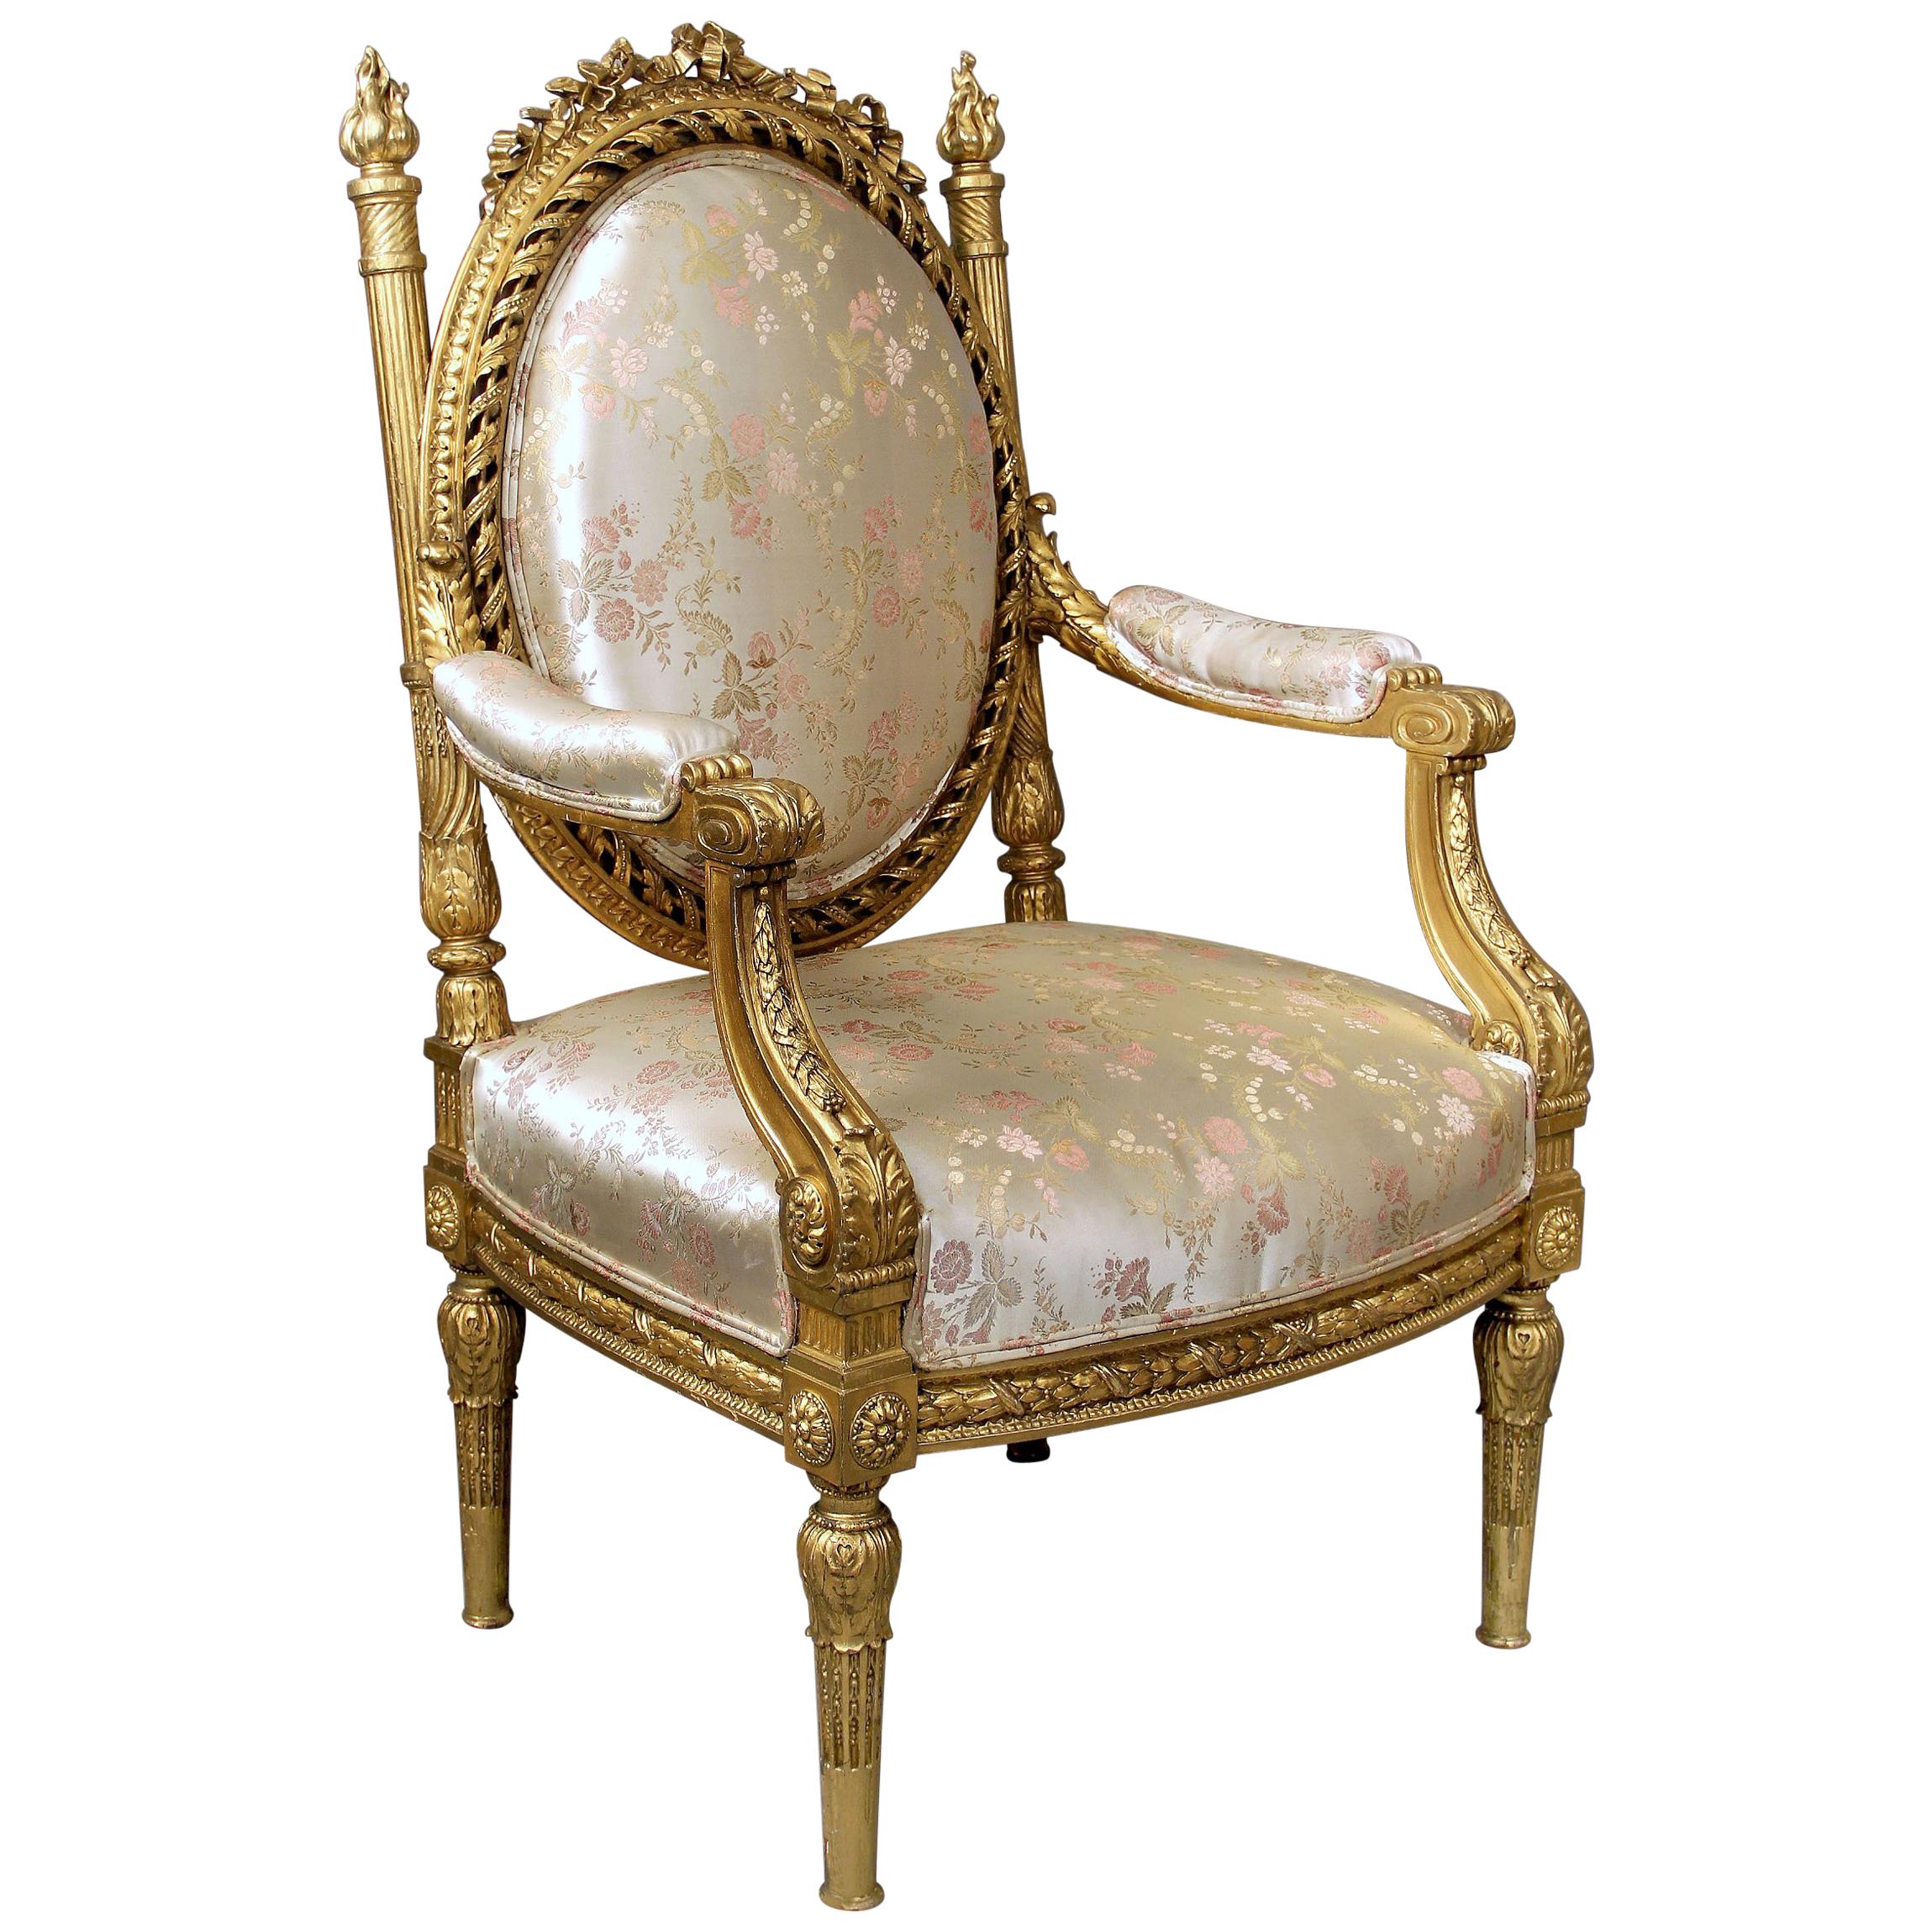 Very Impressive Late 19th Century Louis XVI Style Giltwood Throne Chair